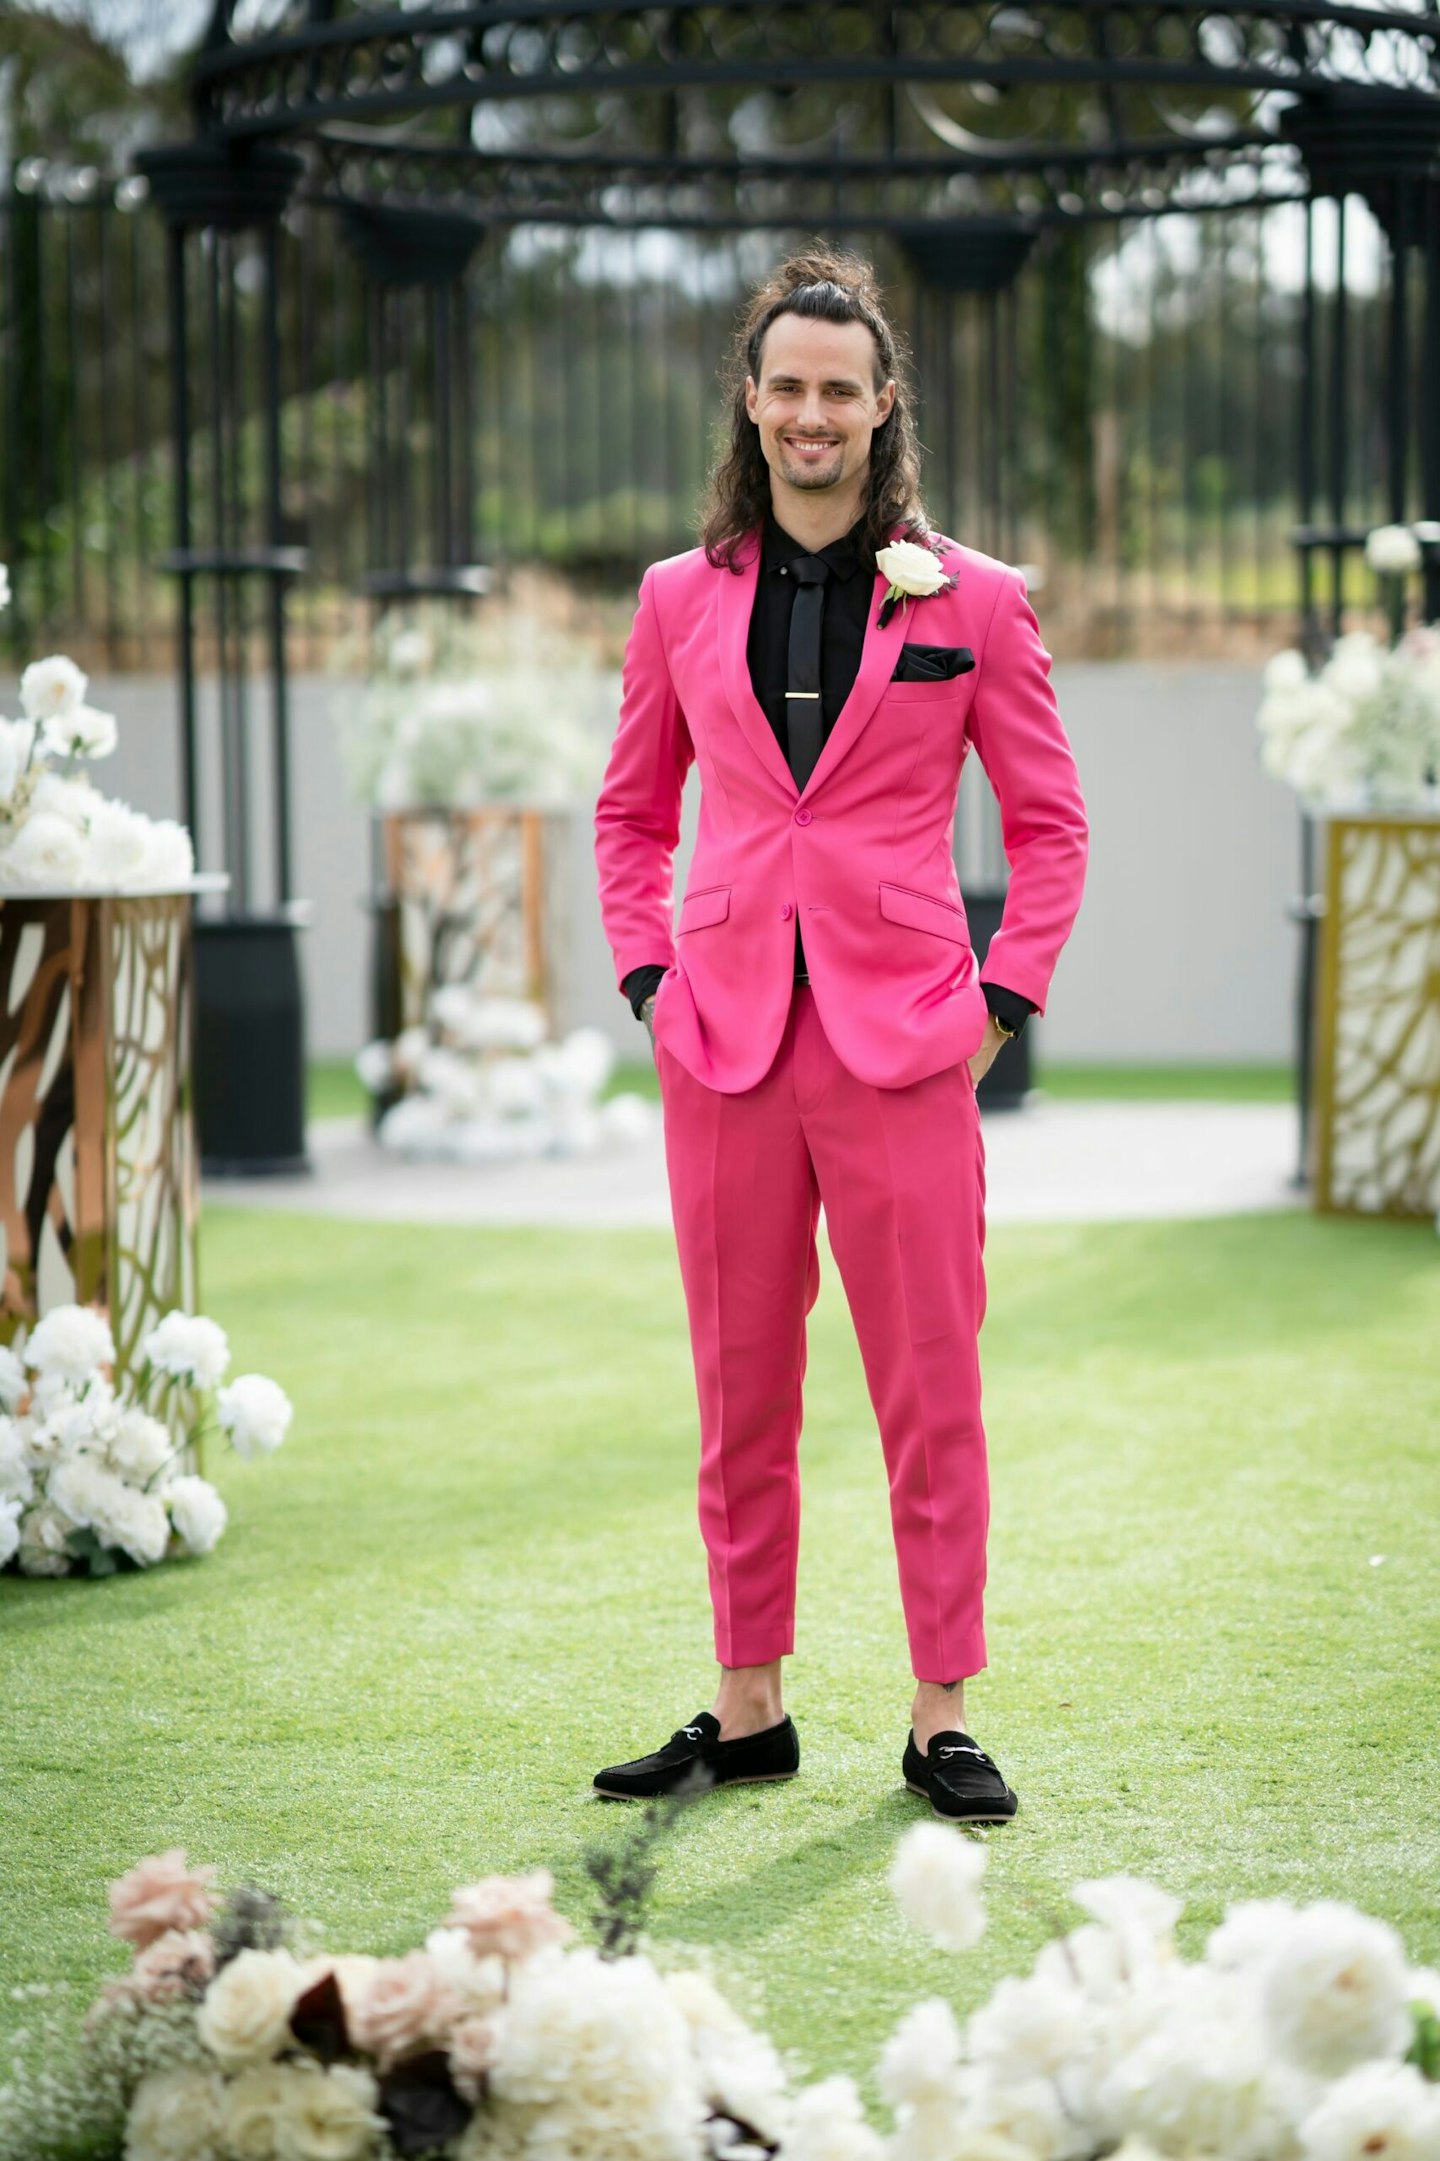 Married At First Sight Australia's Jesse